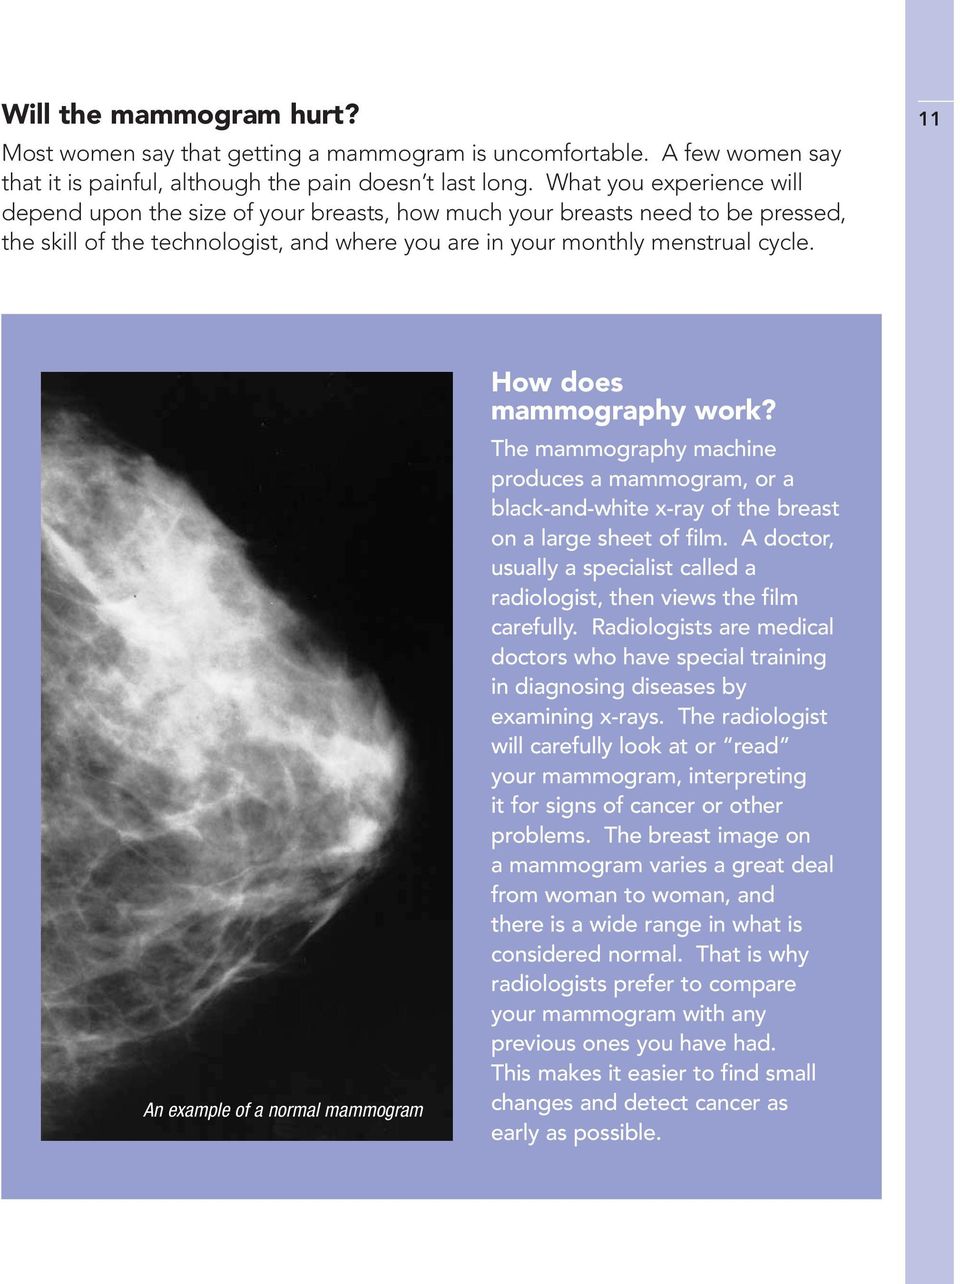 11 An example of a normal mammogram How does mammography work? The mammography machine produces a mammogram, or a black-and-white x-ray of the breast on a large sheet of film.